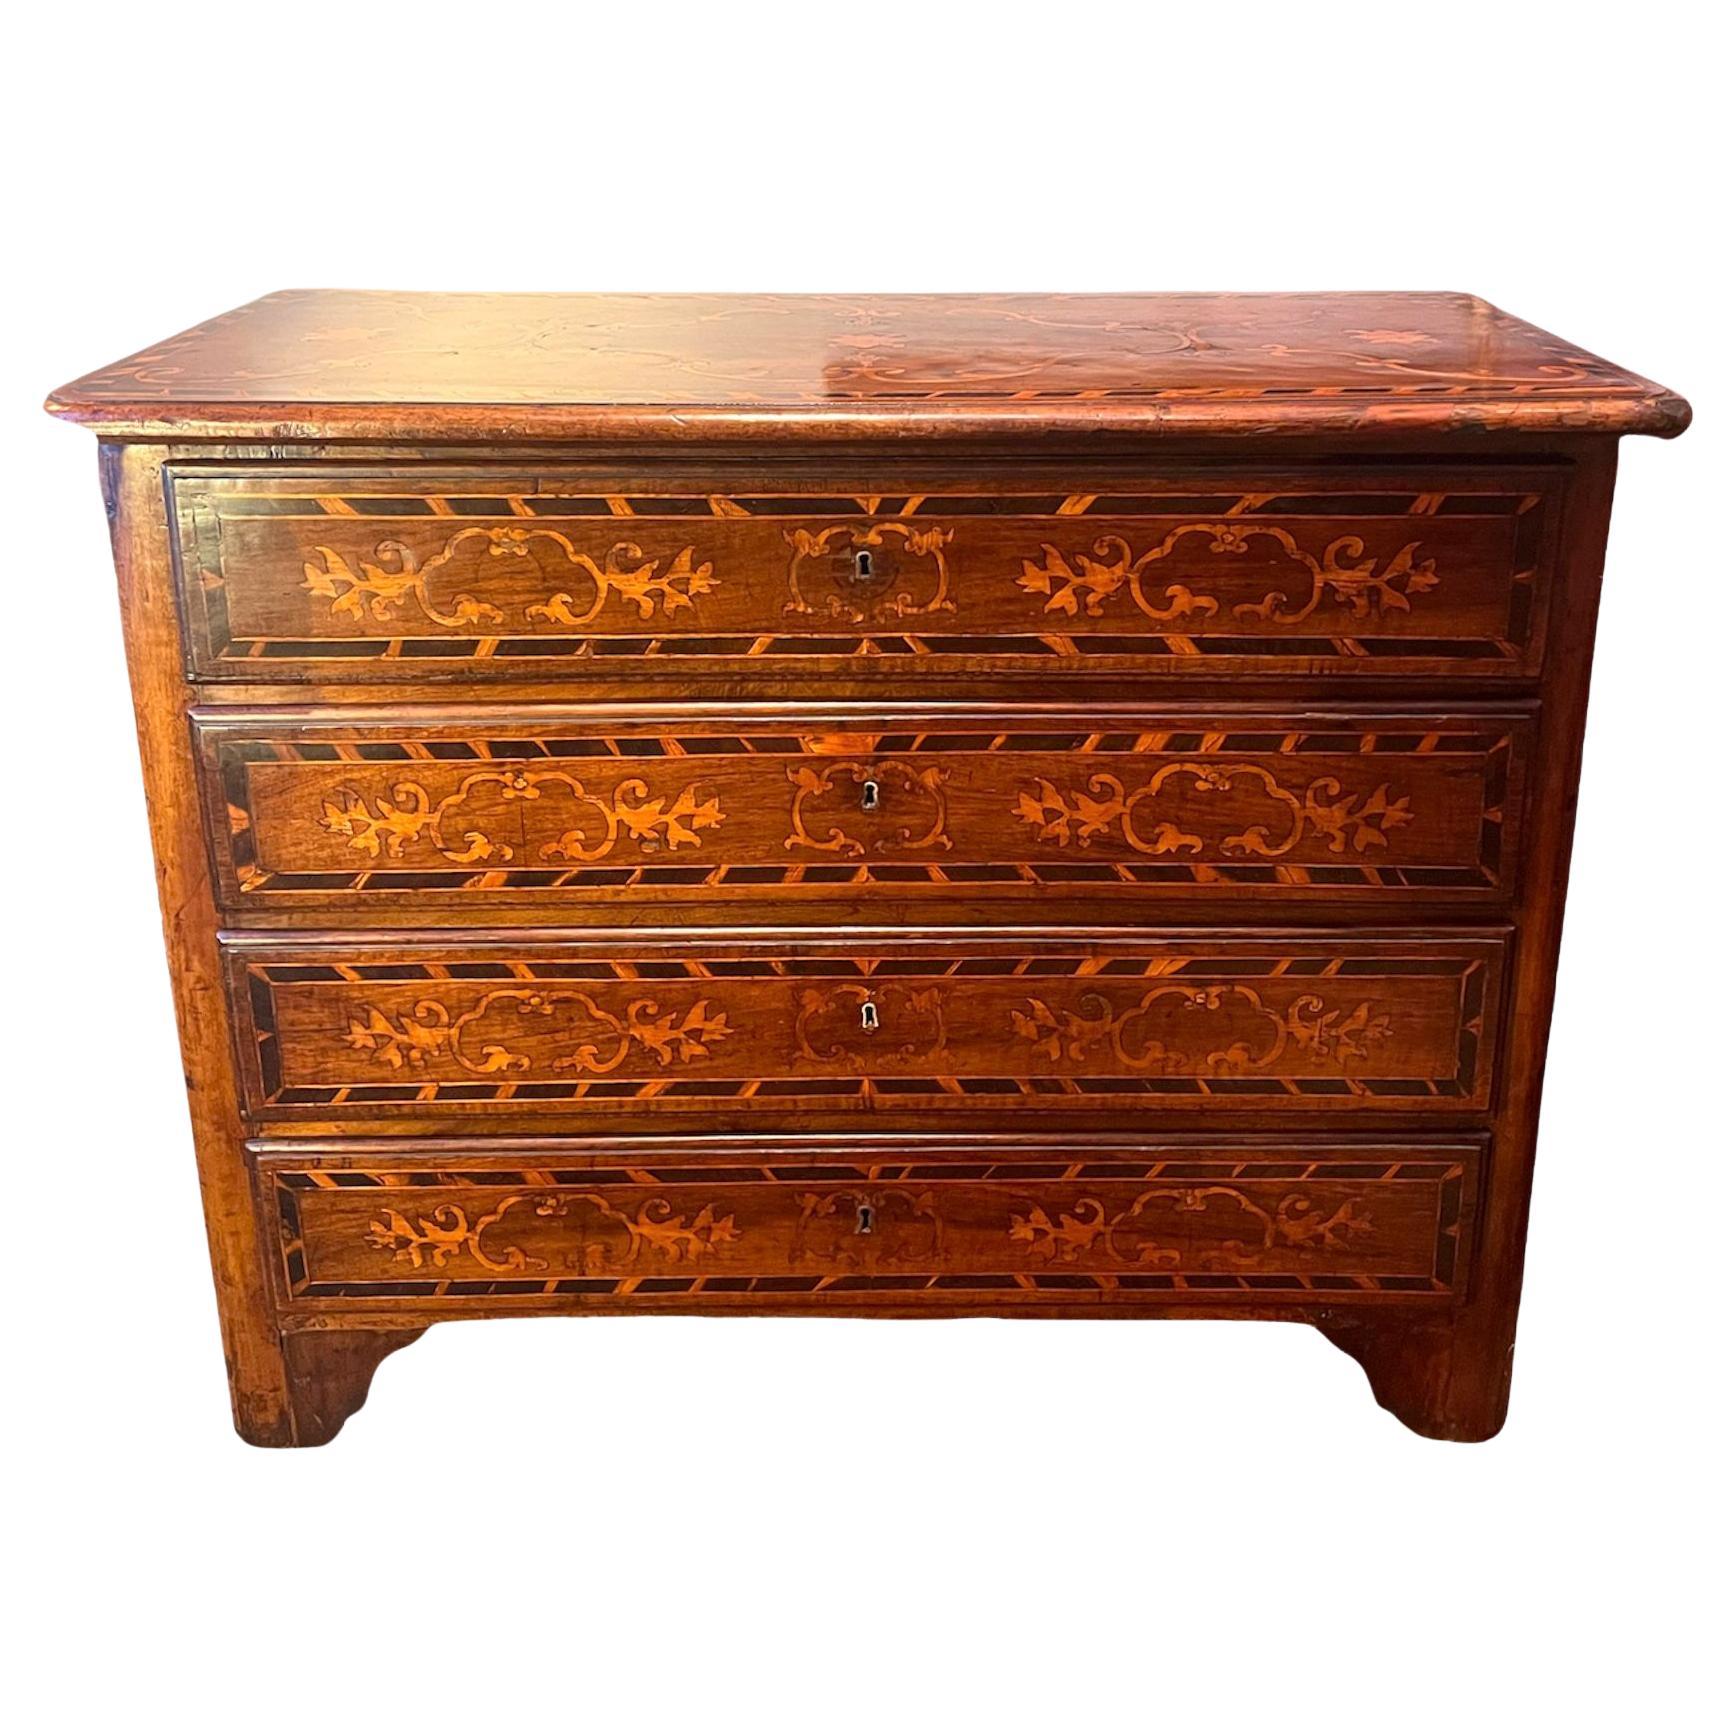  Inlaid solid walnut chest of drawers For Sale